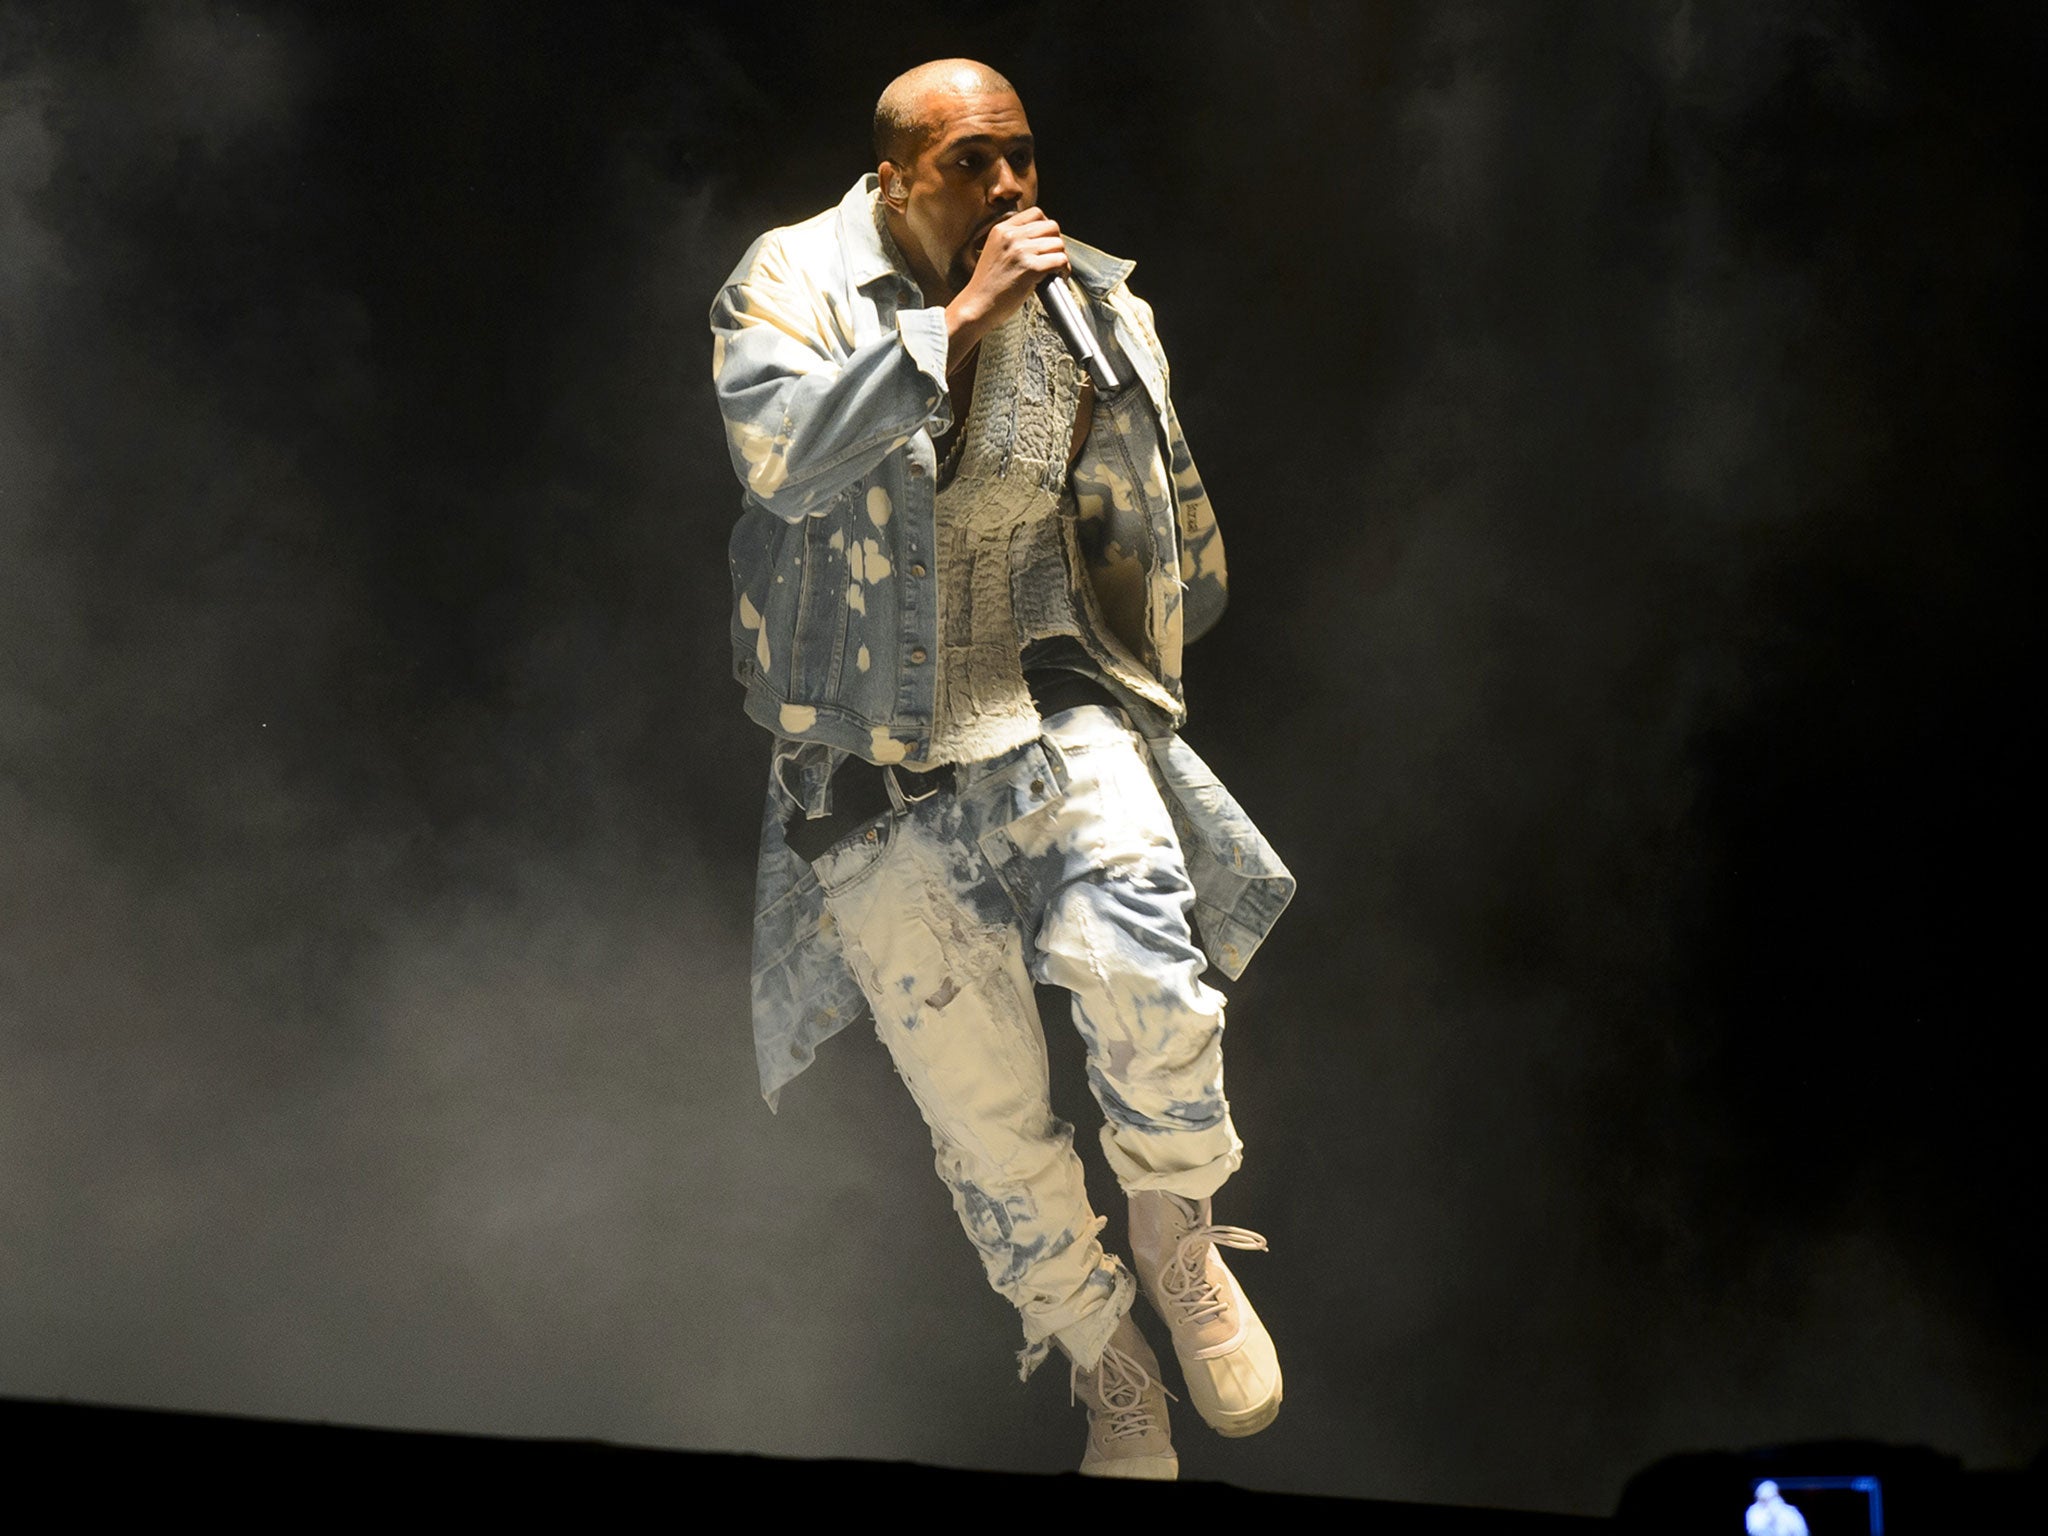 Kanye West storms the Pyramid Stage at Glastonbury to prove any doubters wrong